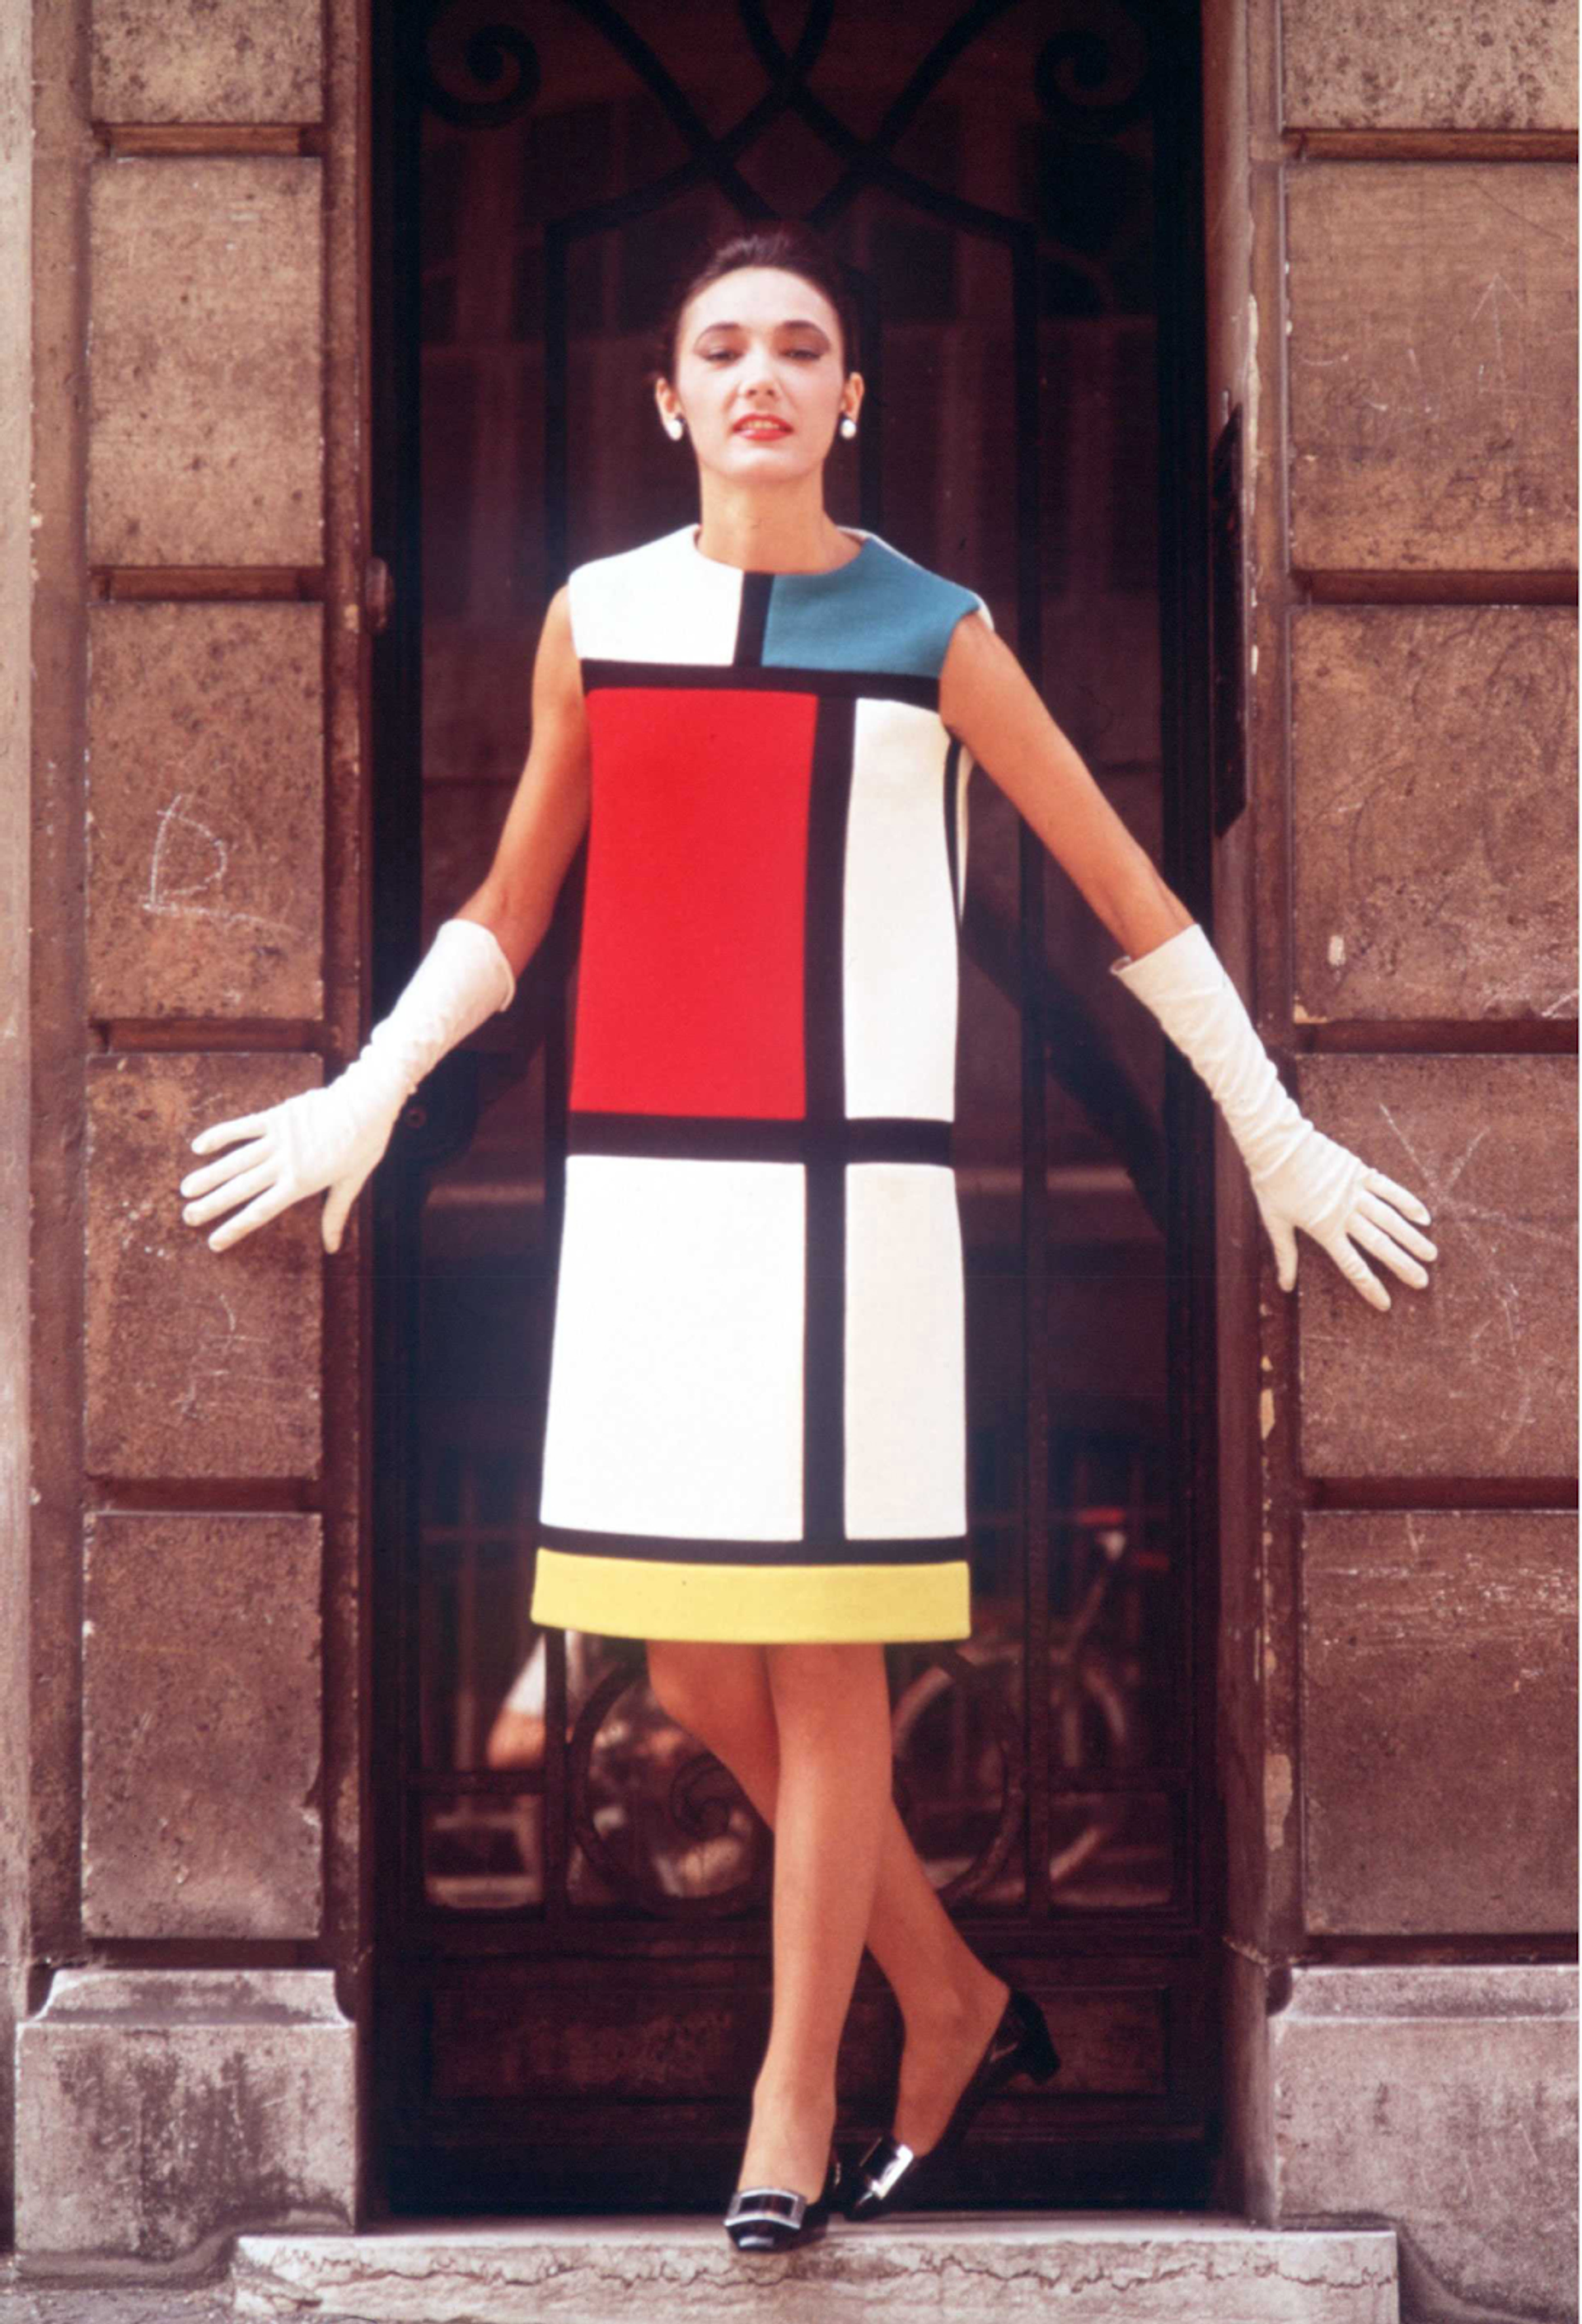 Woman stood in a doorway wearing a cocktail dress with graphic white, red, yellow and blue rectangles on defined by thick black lines